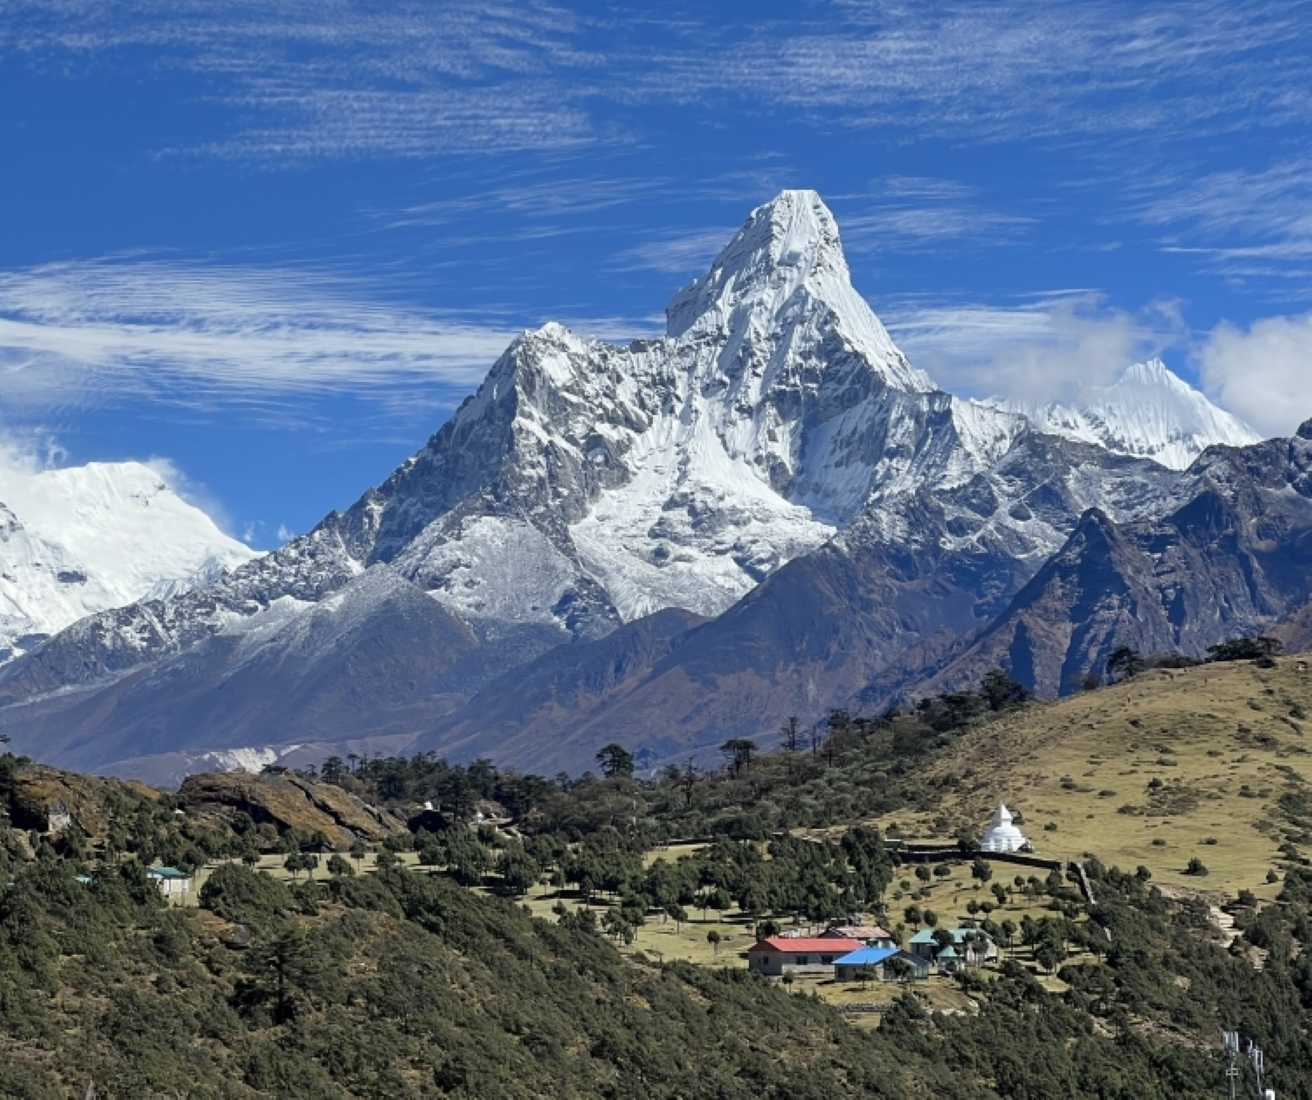 Ama Dablam is referred to as the jewel of the Khumbu Valley